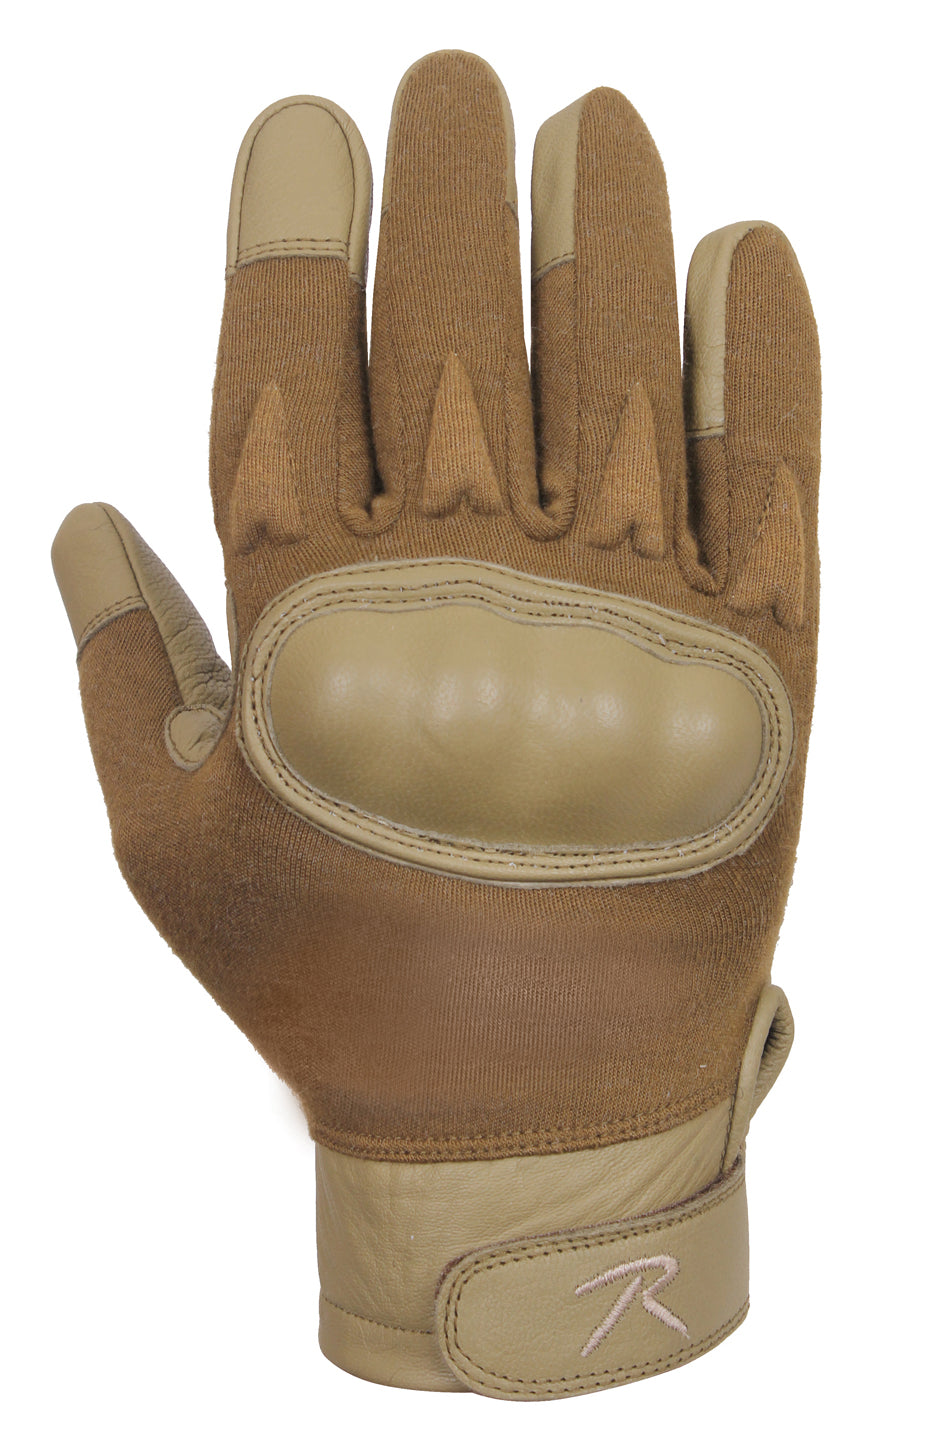 Rothco Hard Knuckle Cut and Fire Resistant Gloves